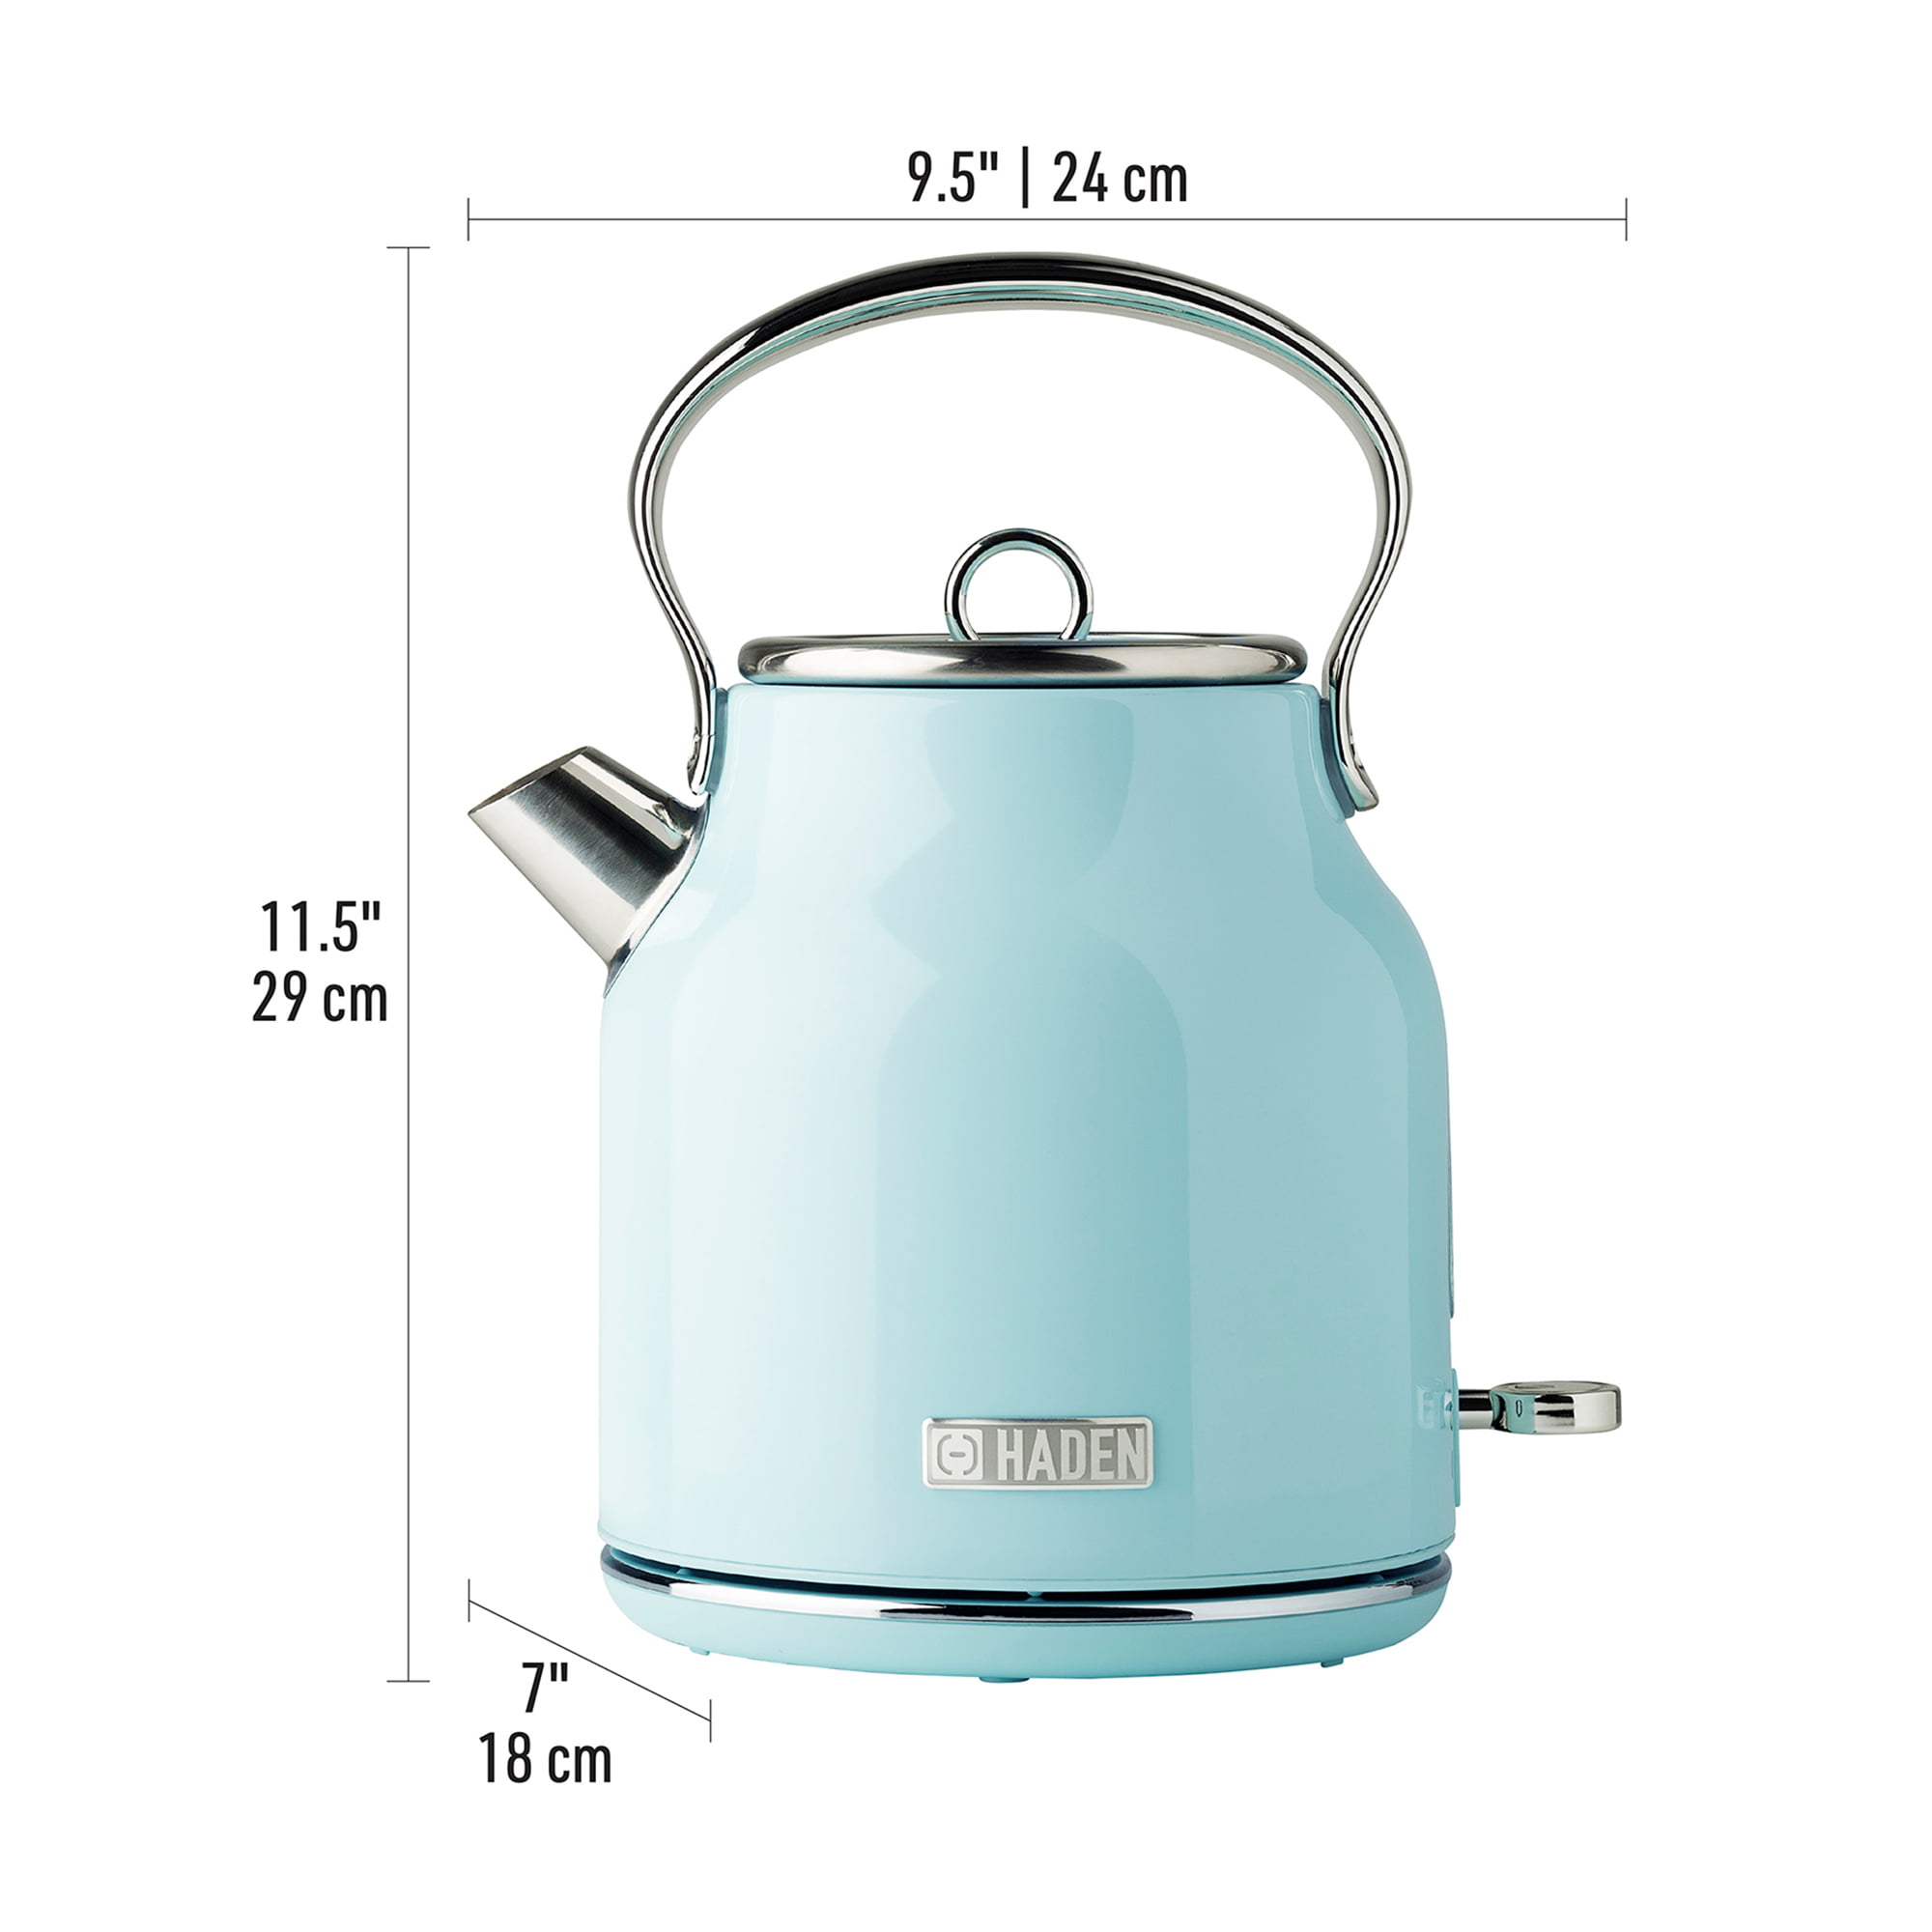  Haden 75004 Heritage 1.7 Liter (7 Cup) Stainless Steel Electric  Kettle with Auto Shut-Off and Boil Dry Protection, Turquoise: Home & Kitchen